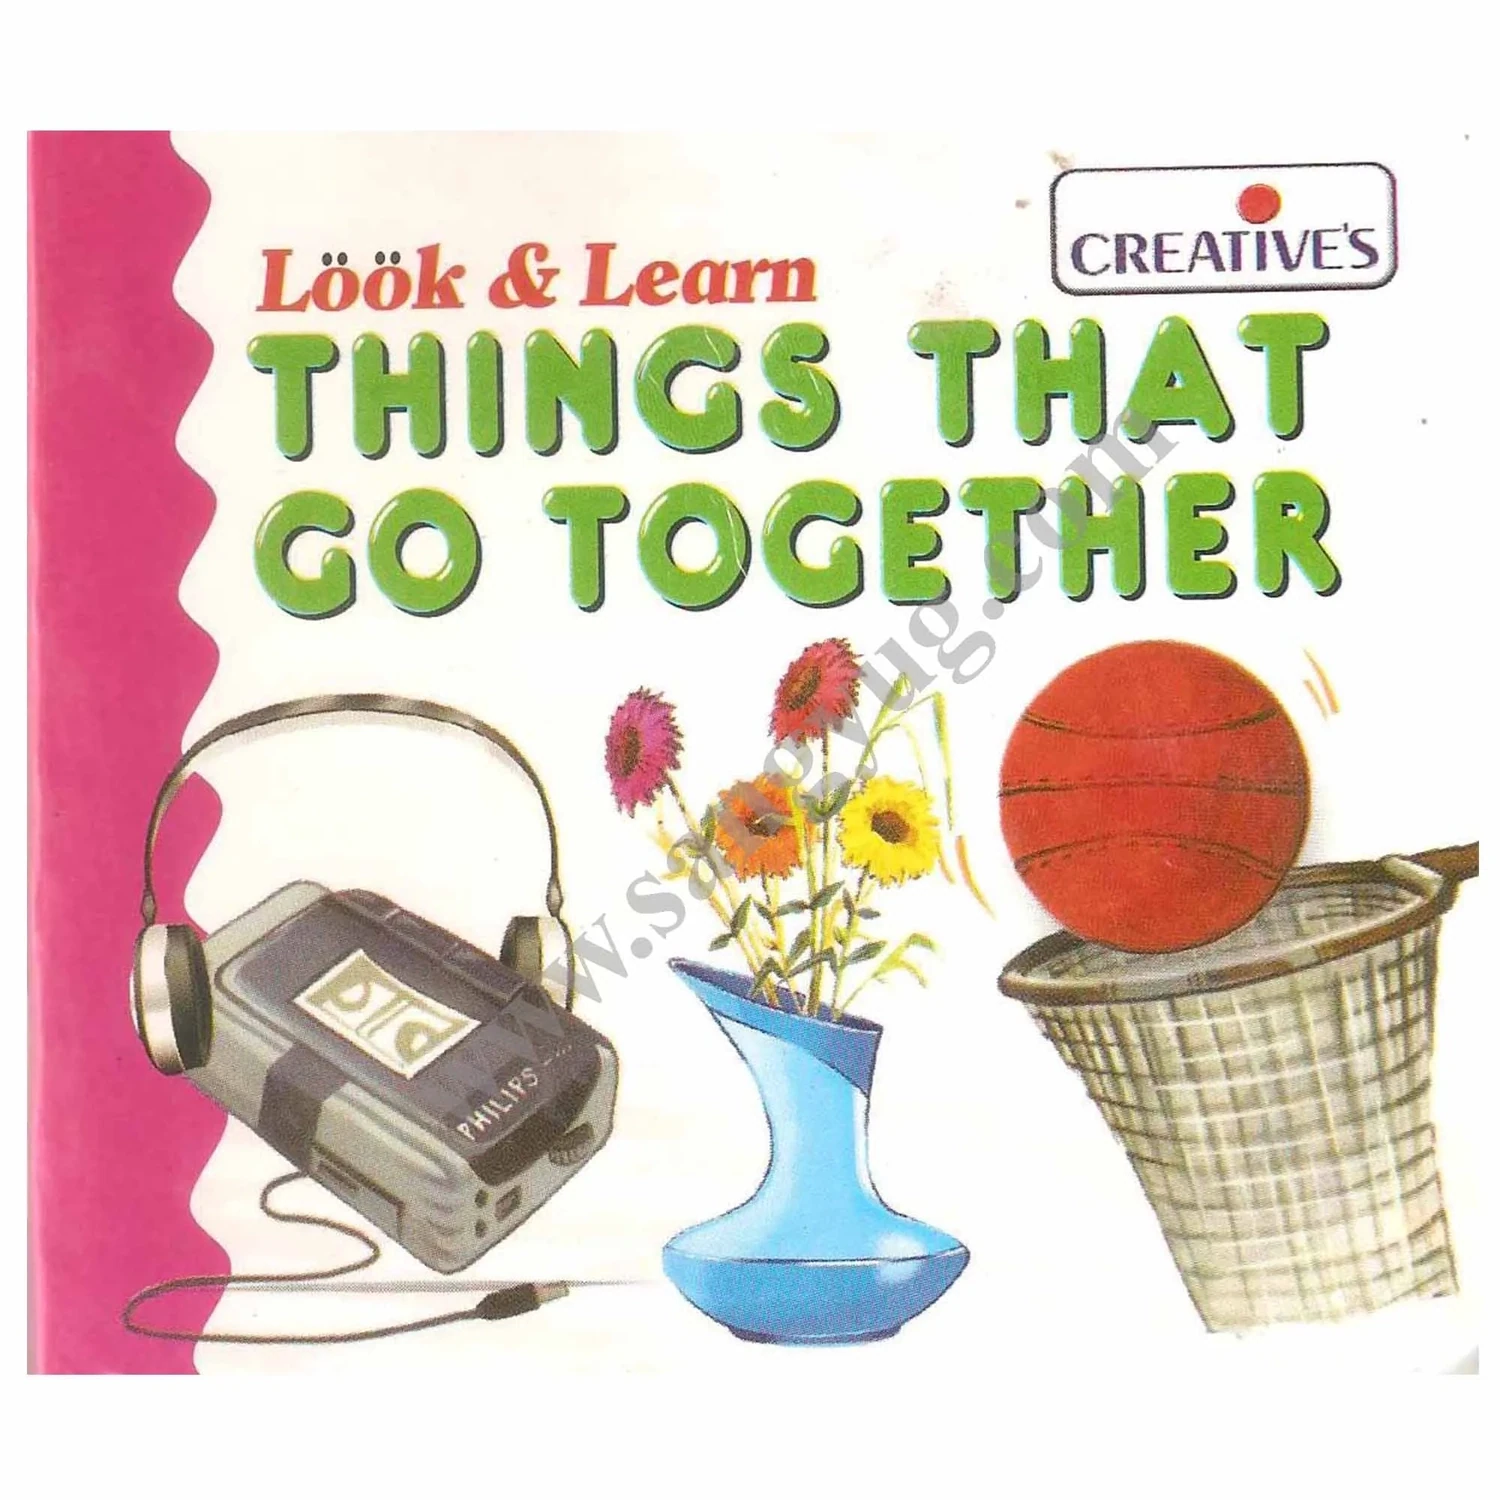 Creative look & learn board book  - Things that go together  576